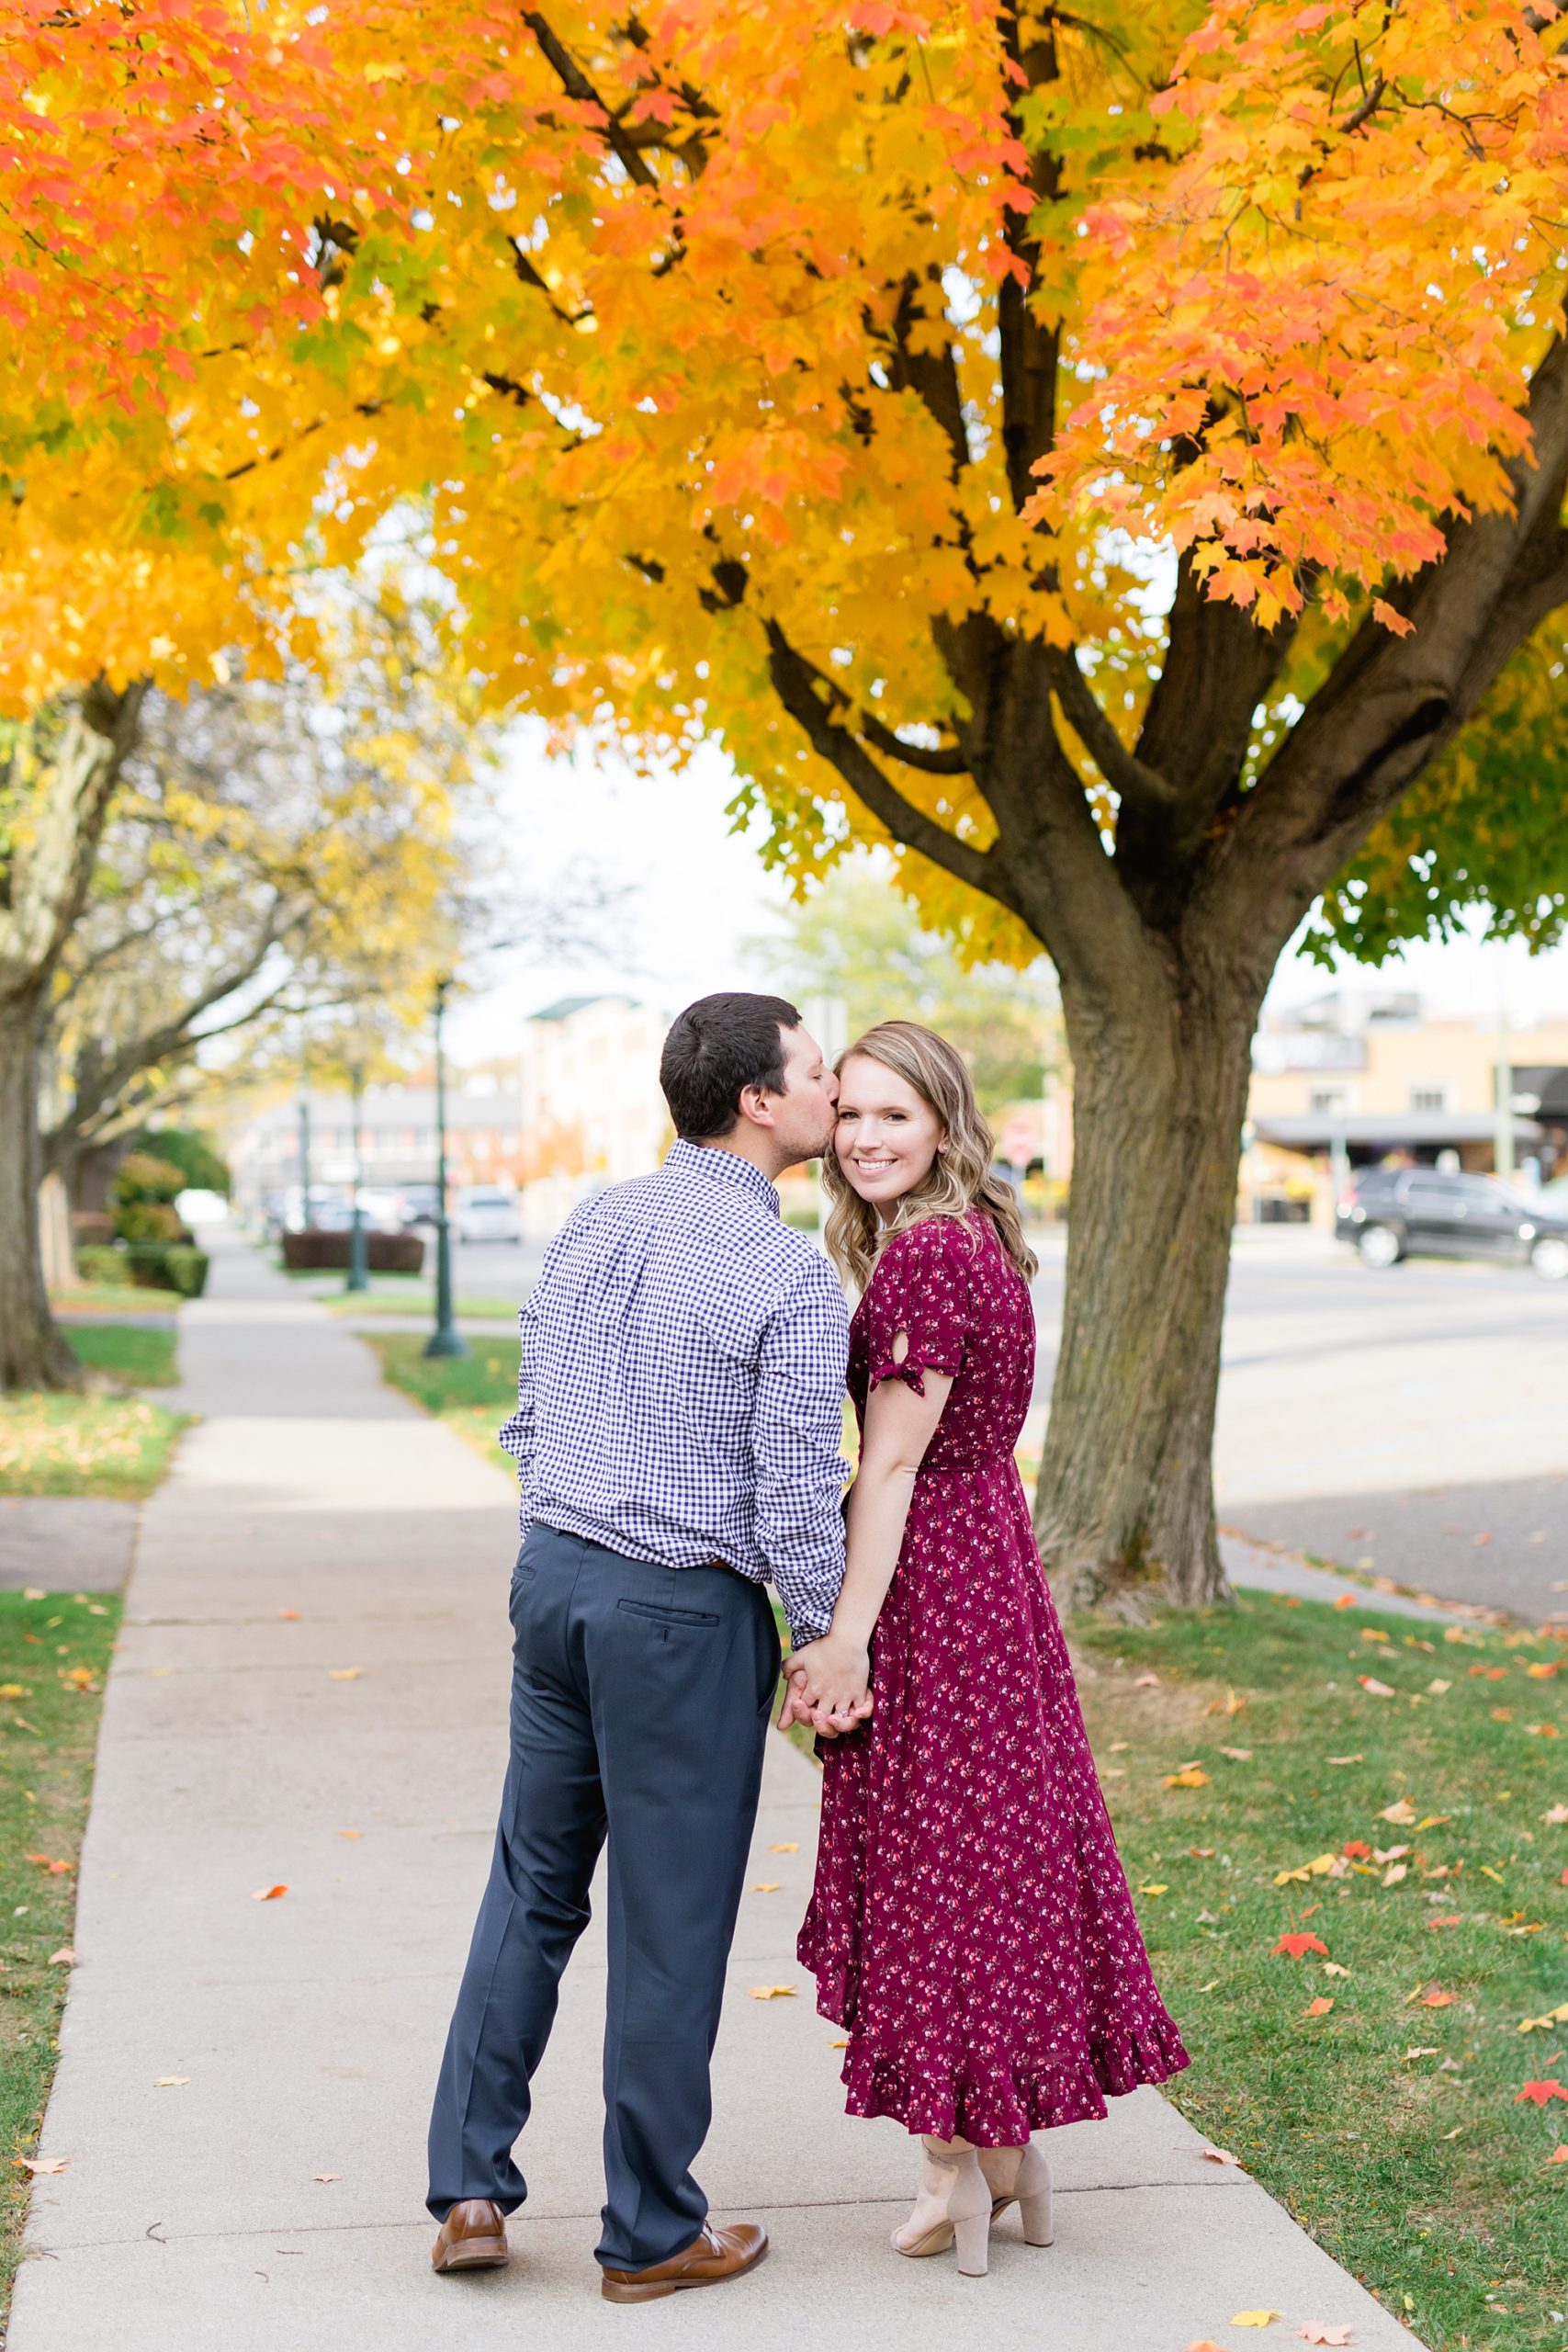 Beautiful downtown Rochester | Fall engagement session | Breanne Rochelle Photography